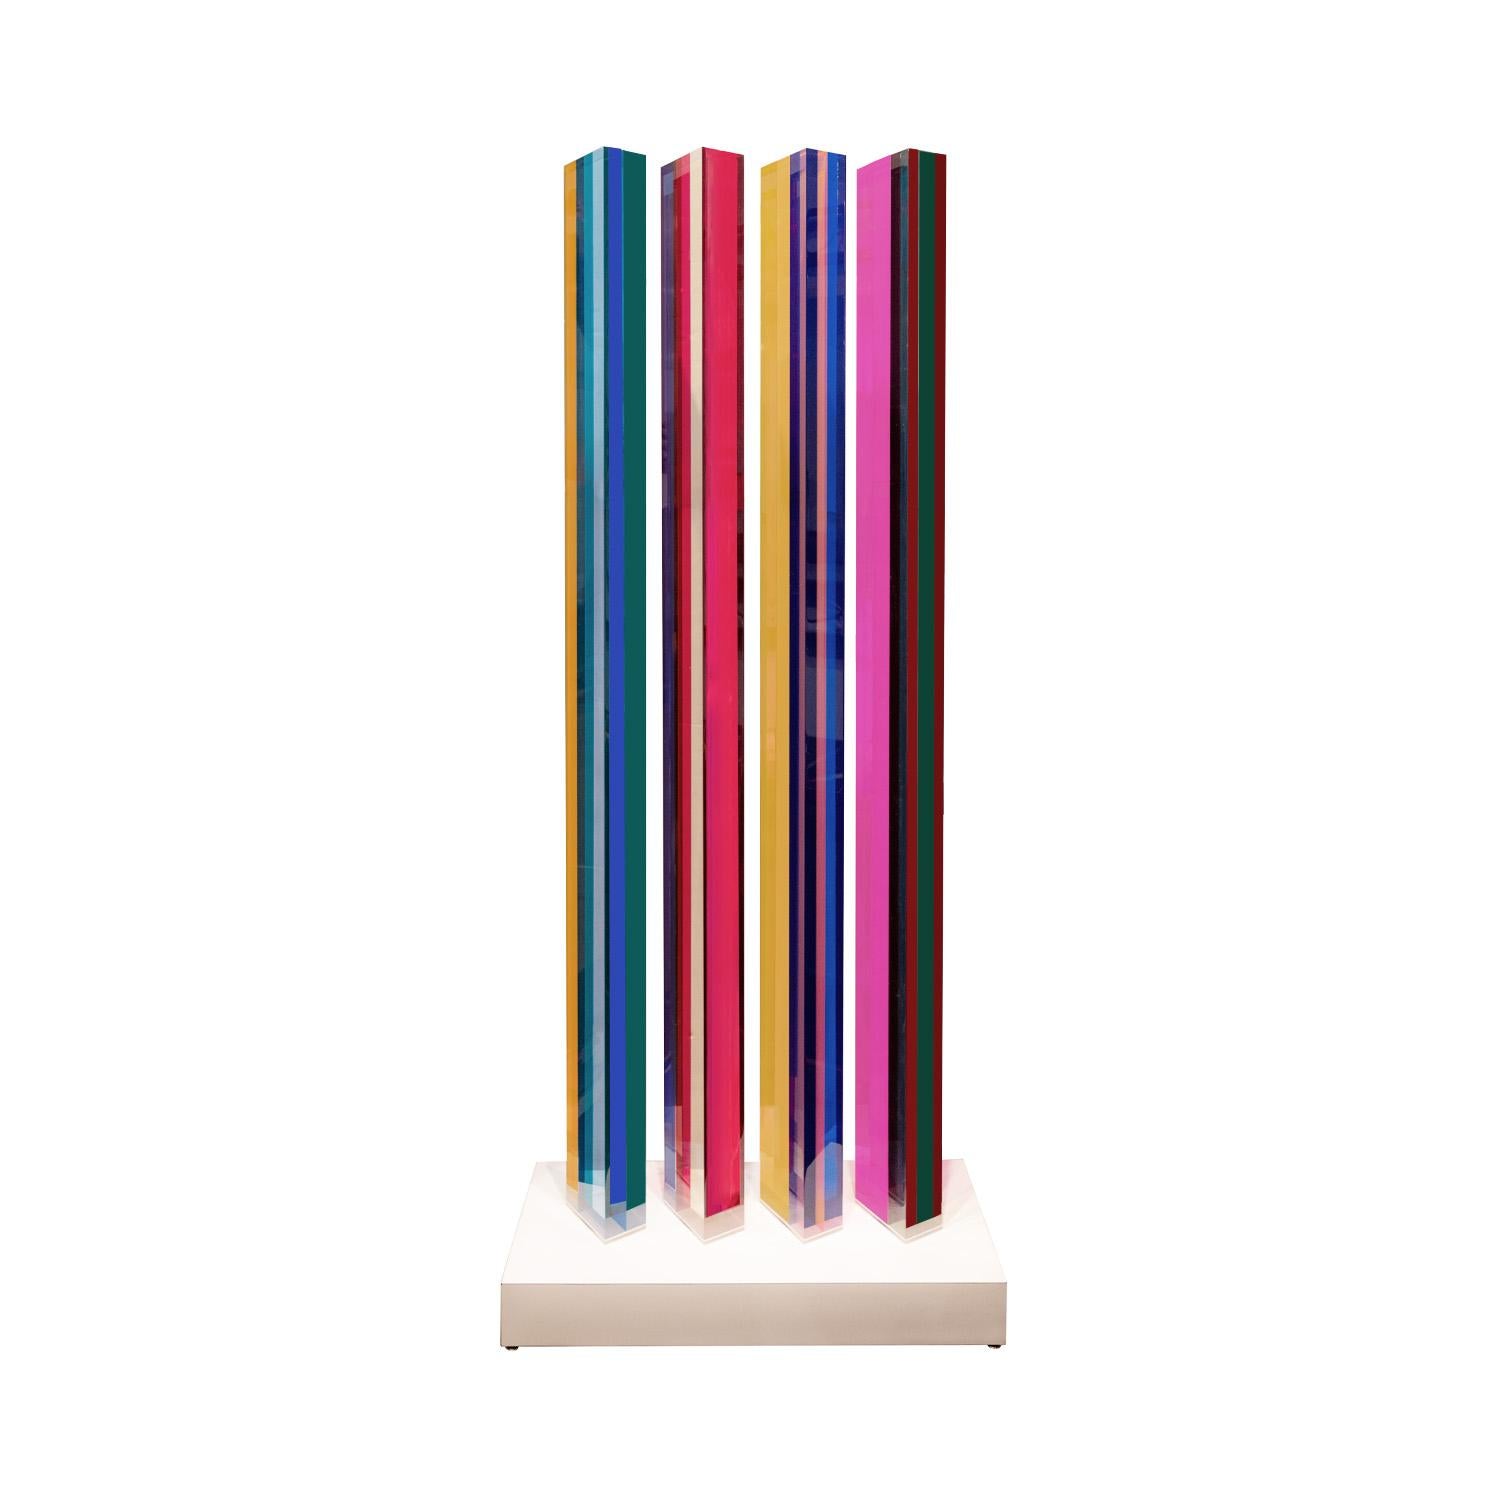 Rare large multicolor lucite 4 column sculpture #2416 with original white laminate base by Vasa Studio, American 1985 (signed, numbered and dated “#2416 Vasa 85” in lucite, comes with original invoice dated 3/16/85). Large multitower sculptures by